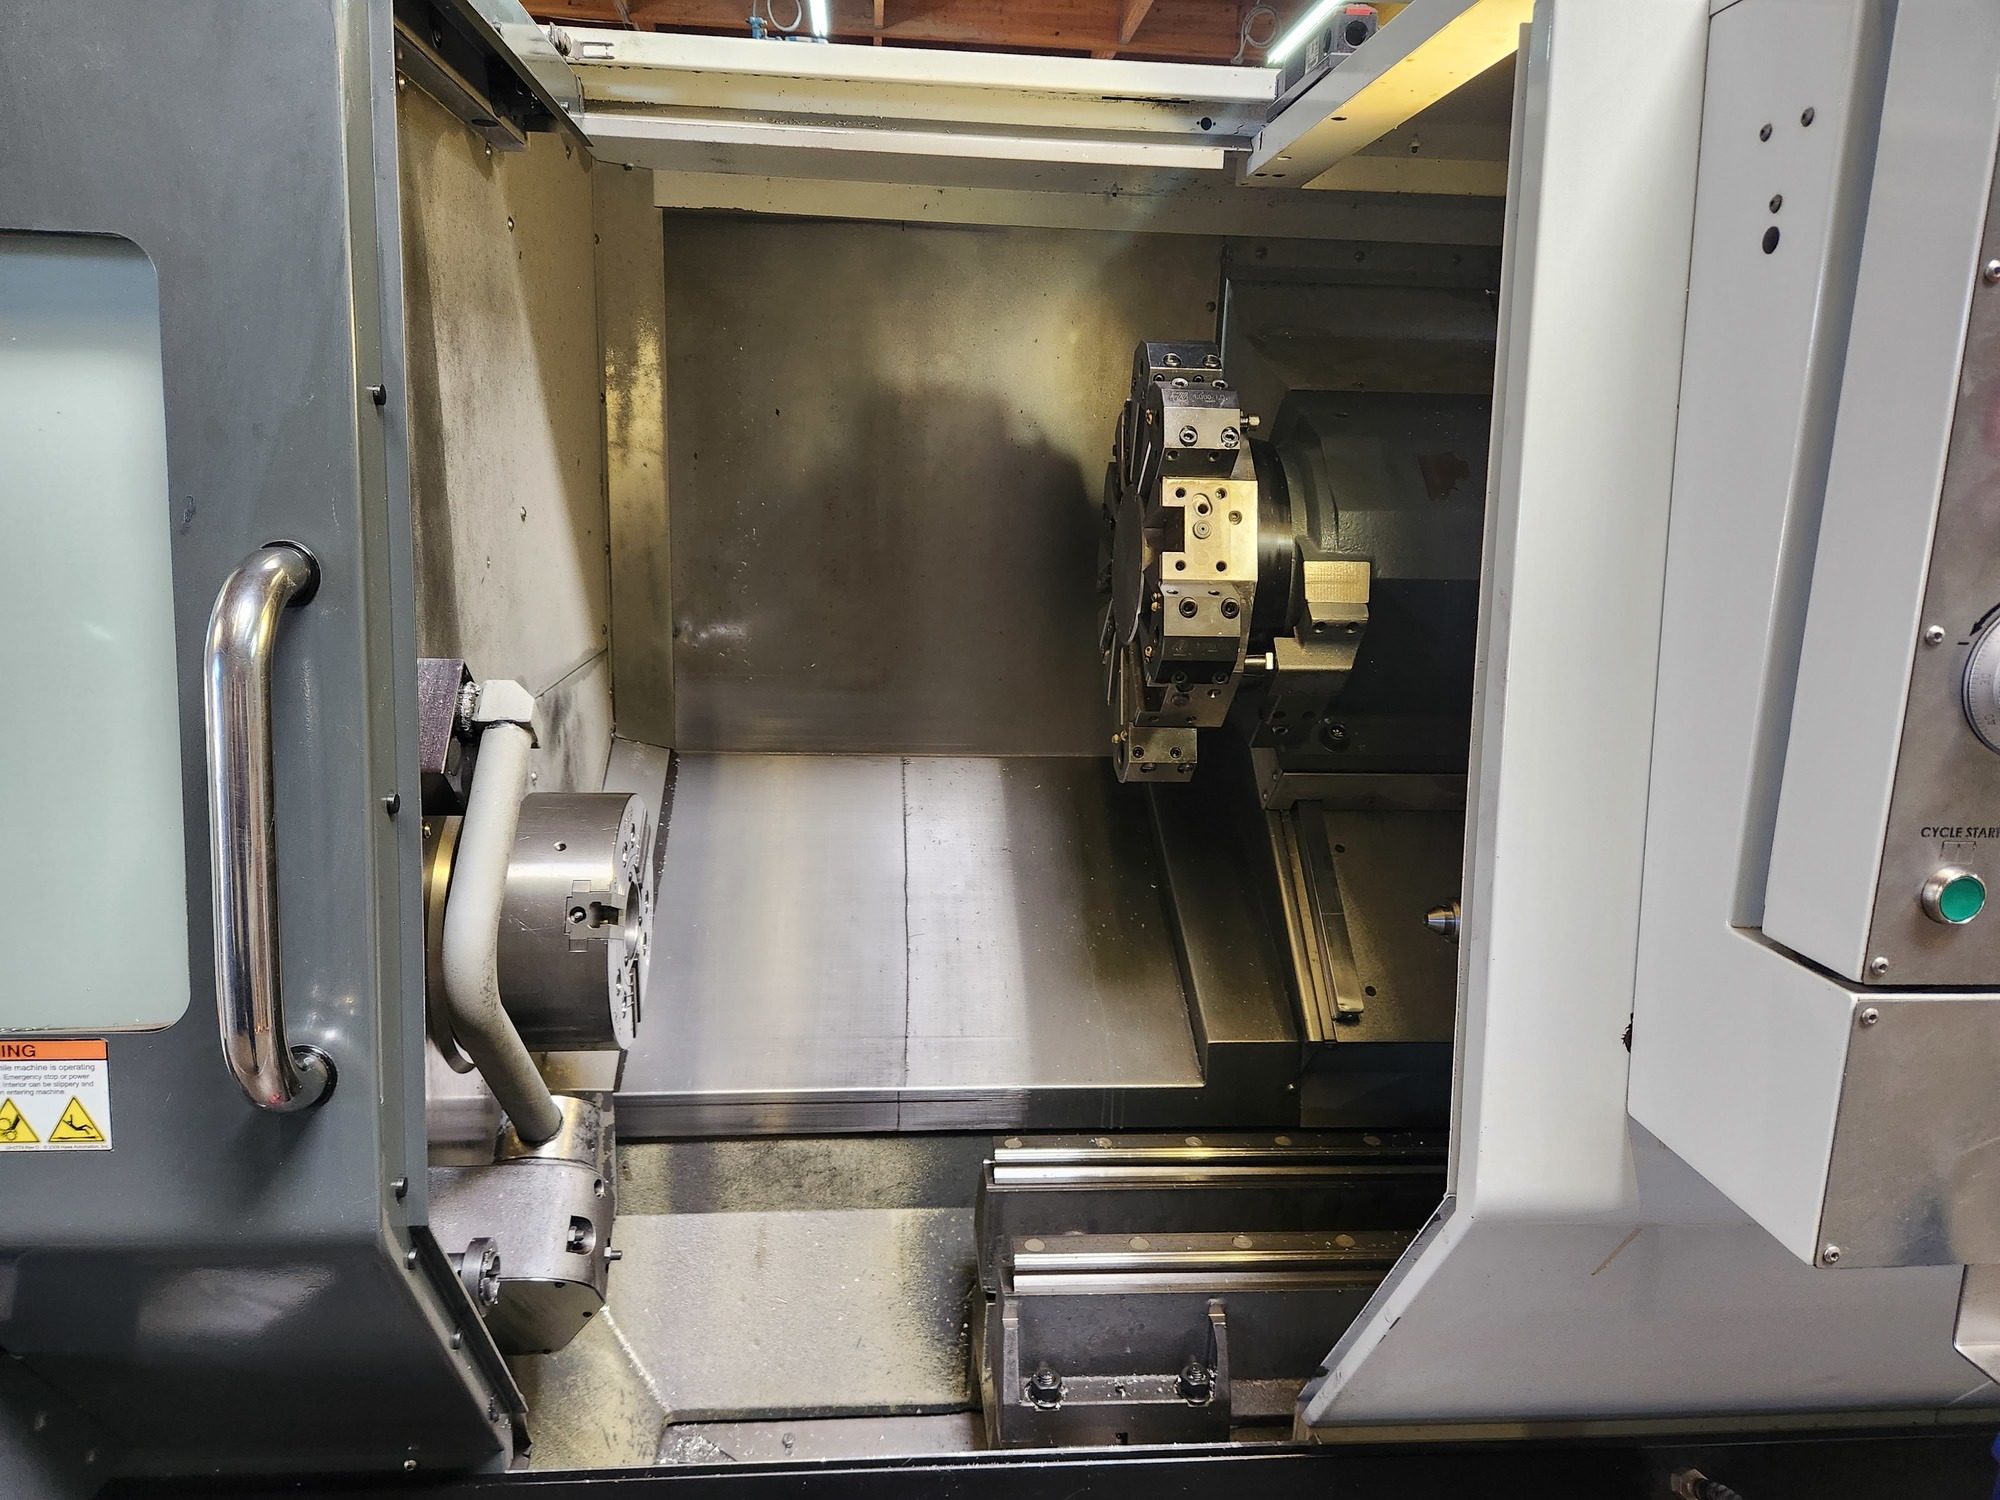 2011 HAAS ST-30 CNC Lathes | SMS Engineering